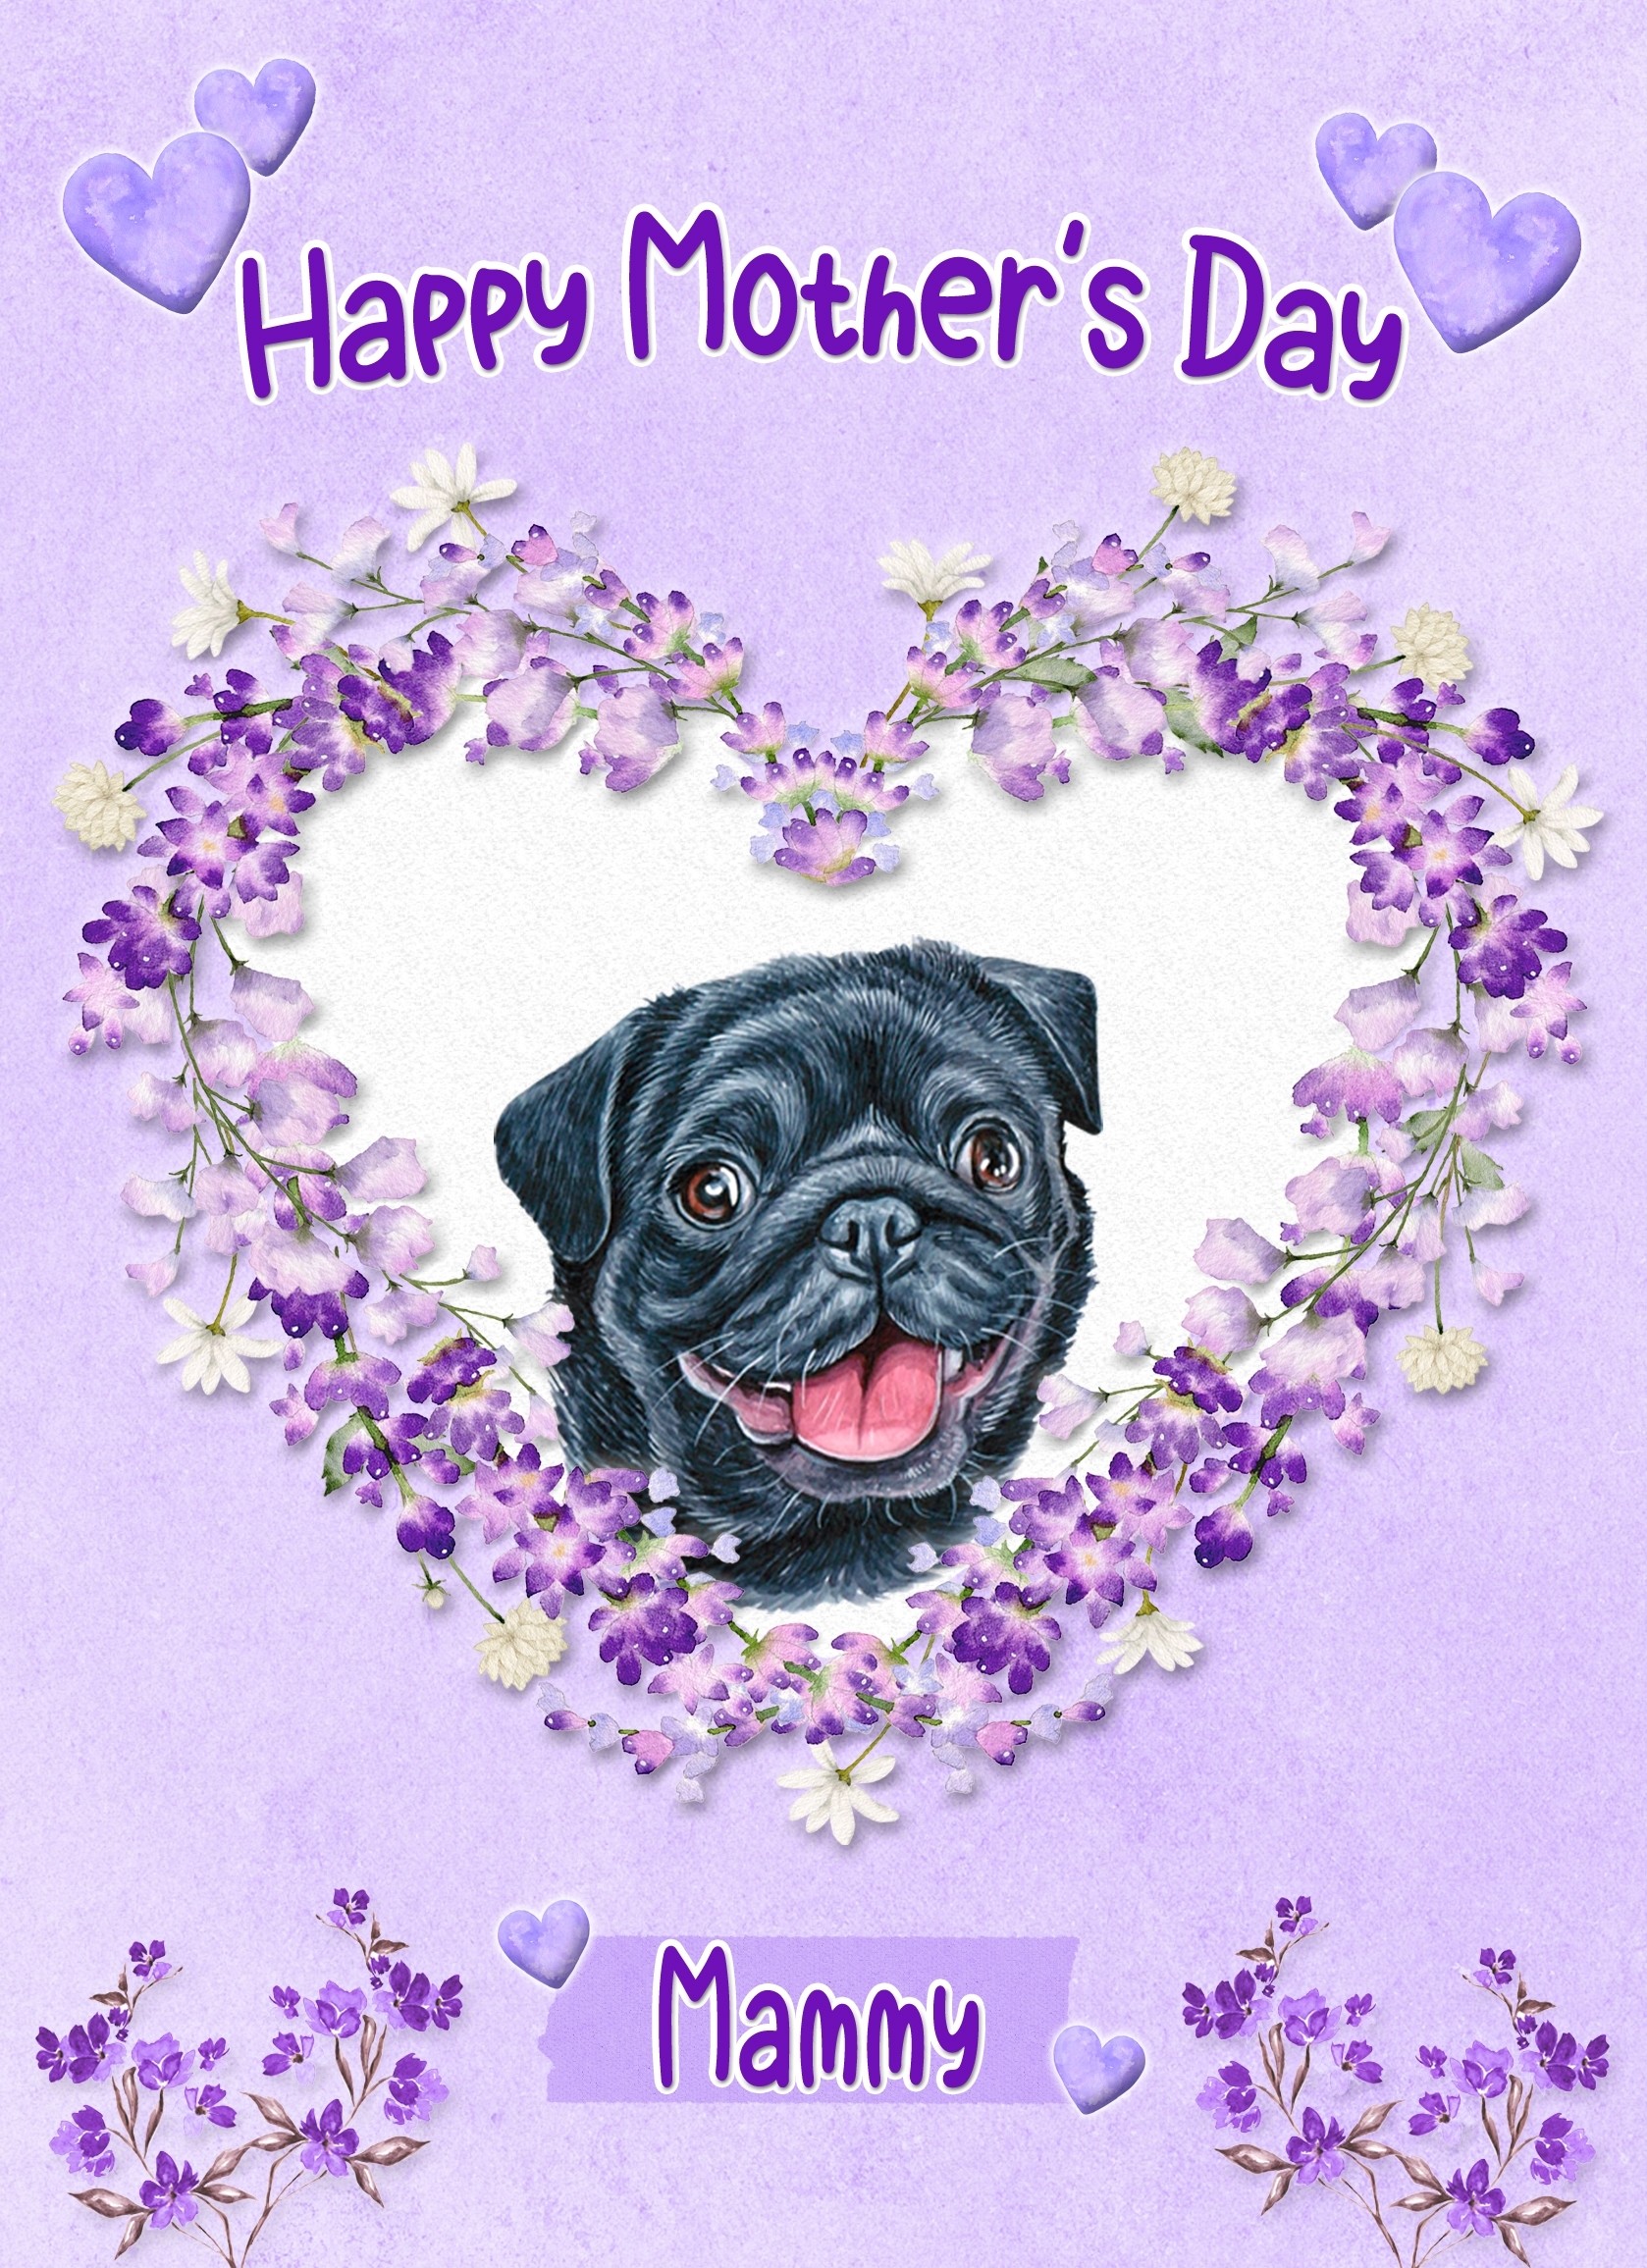 Pug Dog Mothers Day Card (Happy Mothers, Mammy)